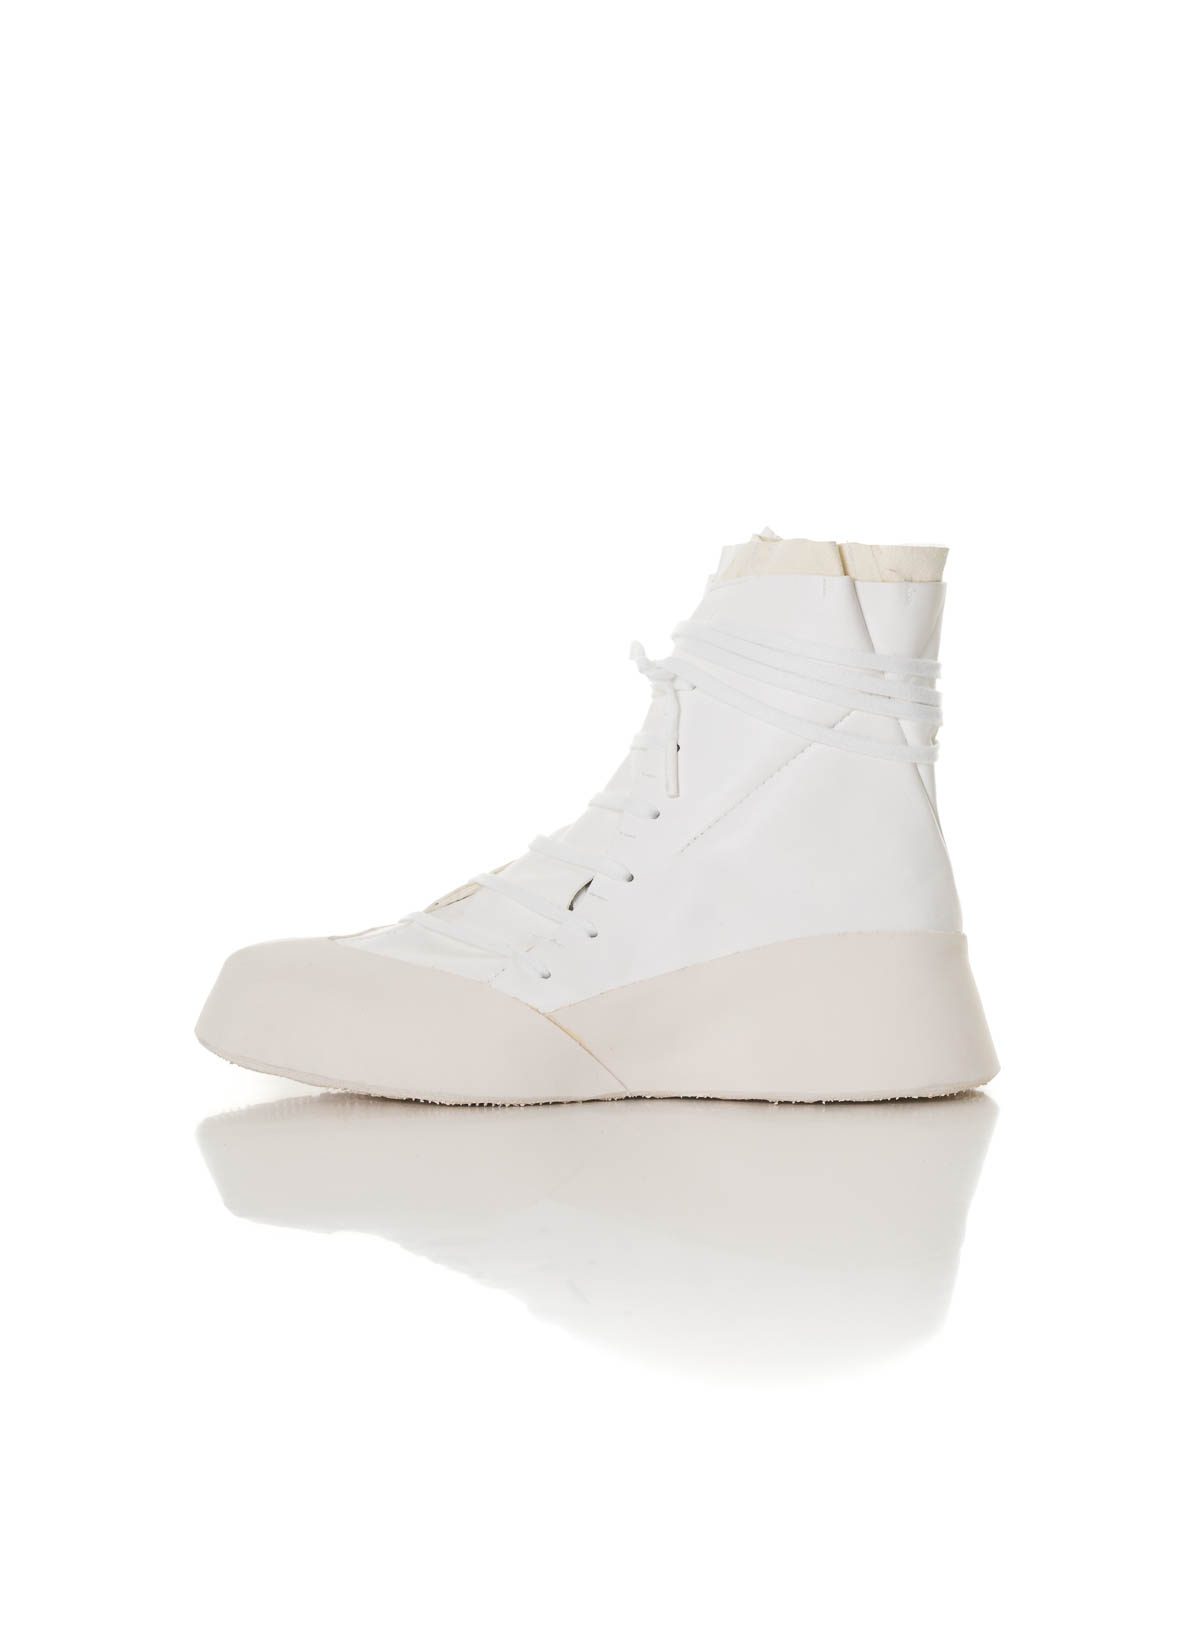 LEON EMANUEL BLANCK Distortion Featherweight High Top Sneaker, optical white,  horse leather